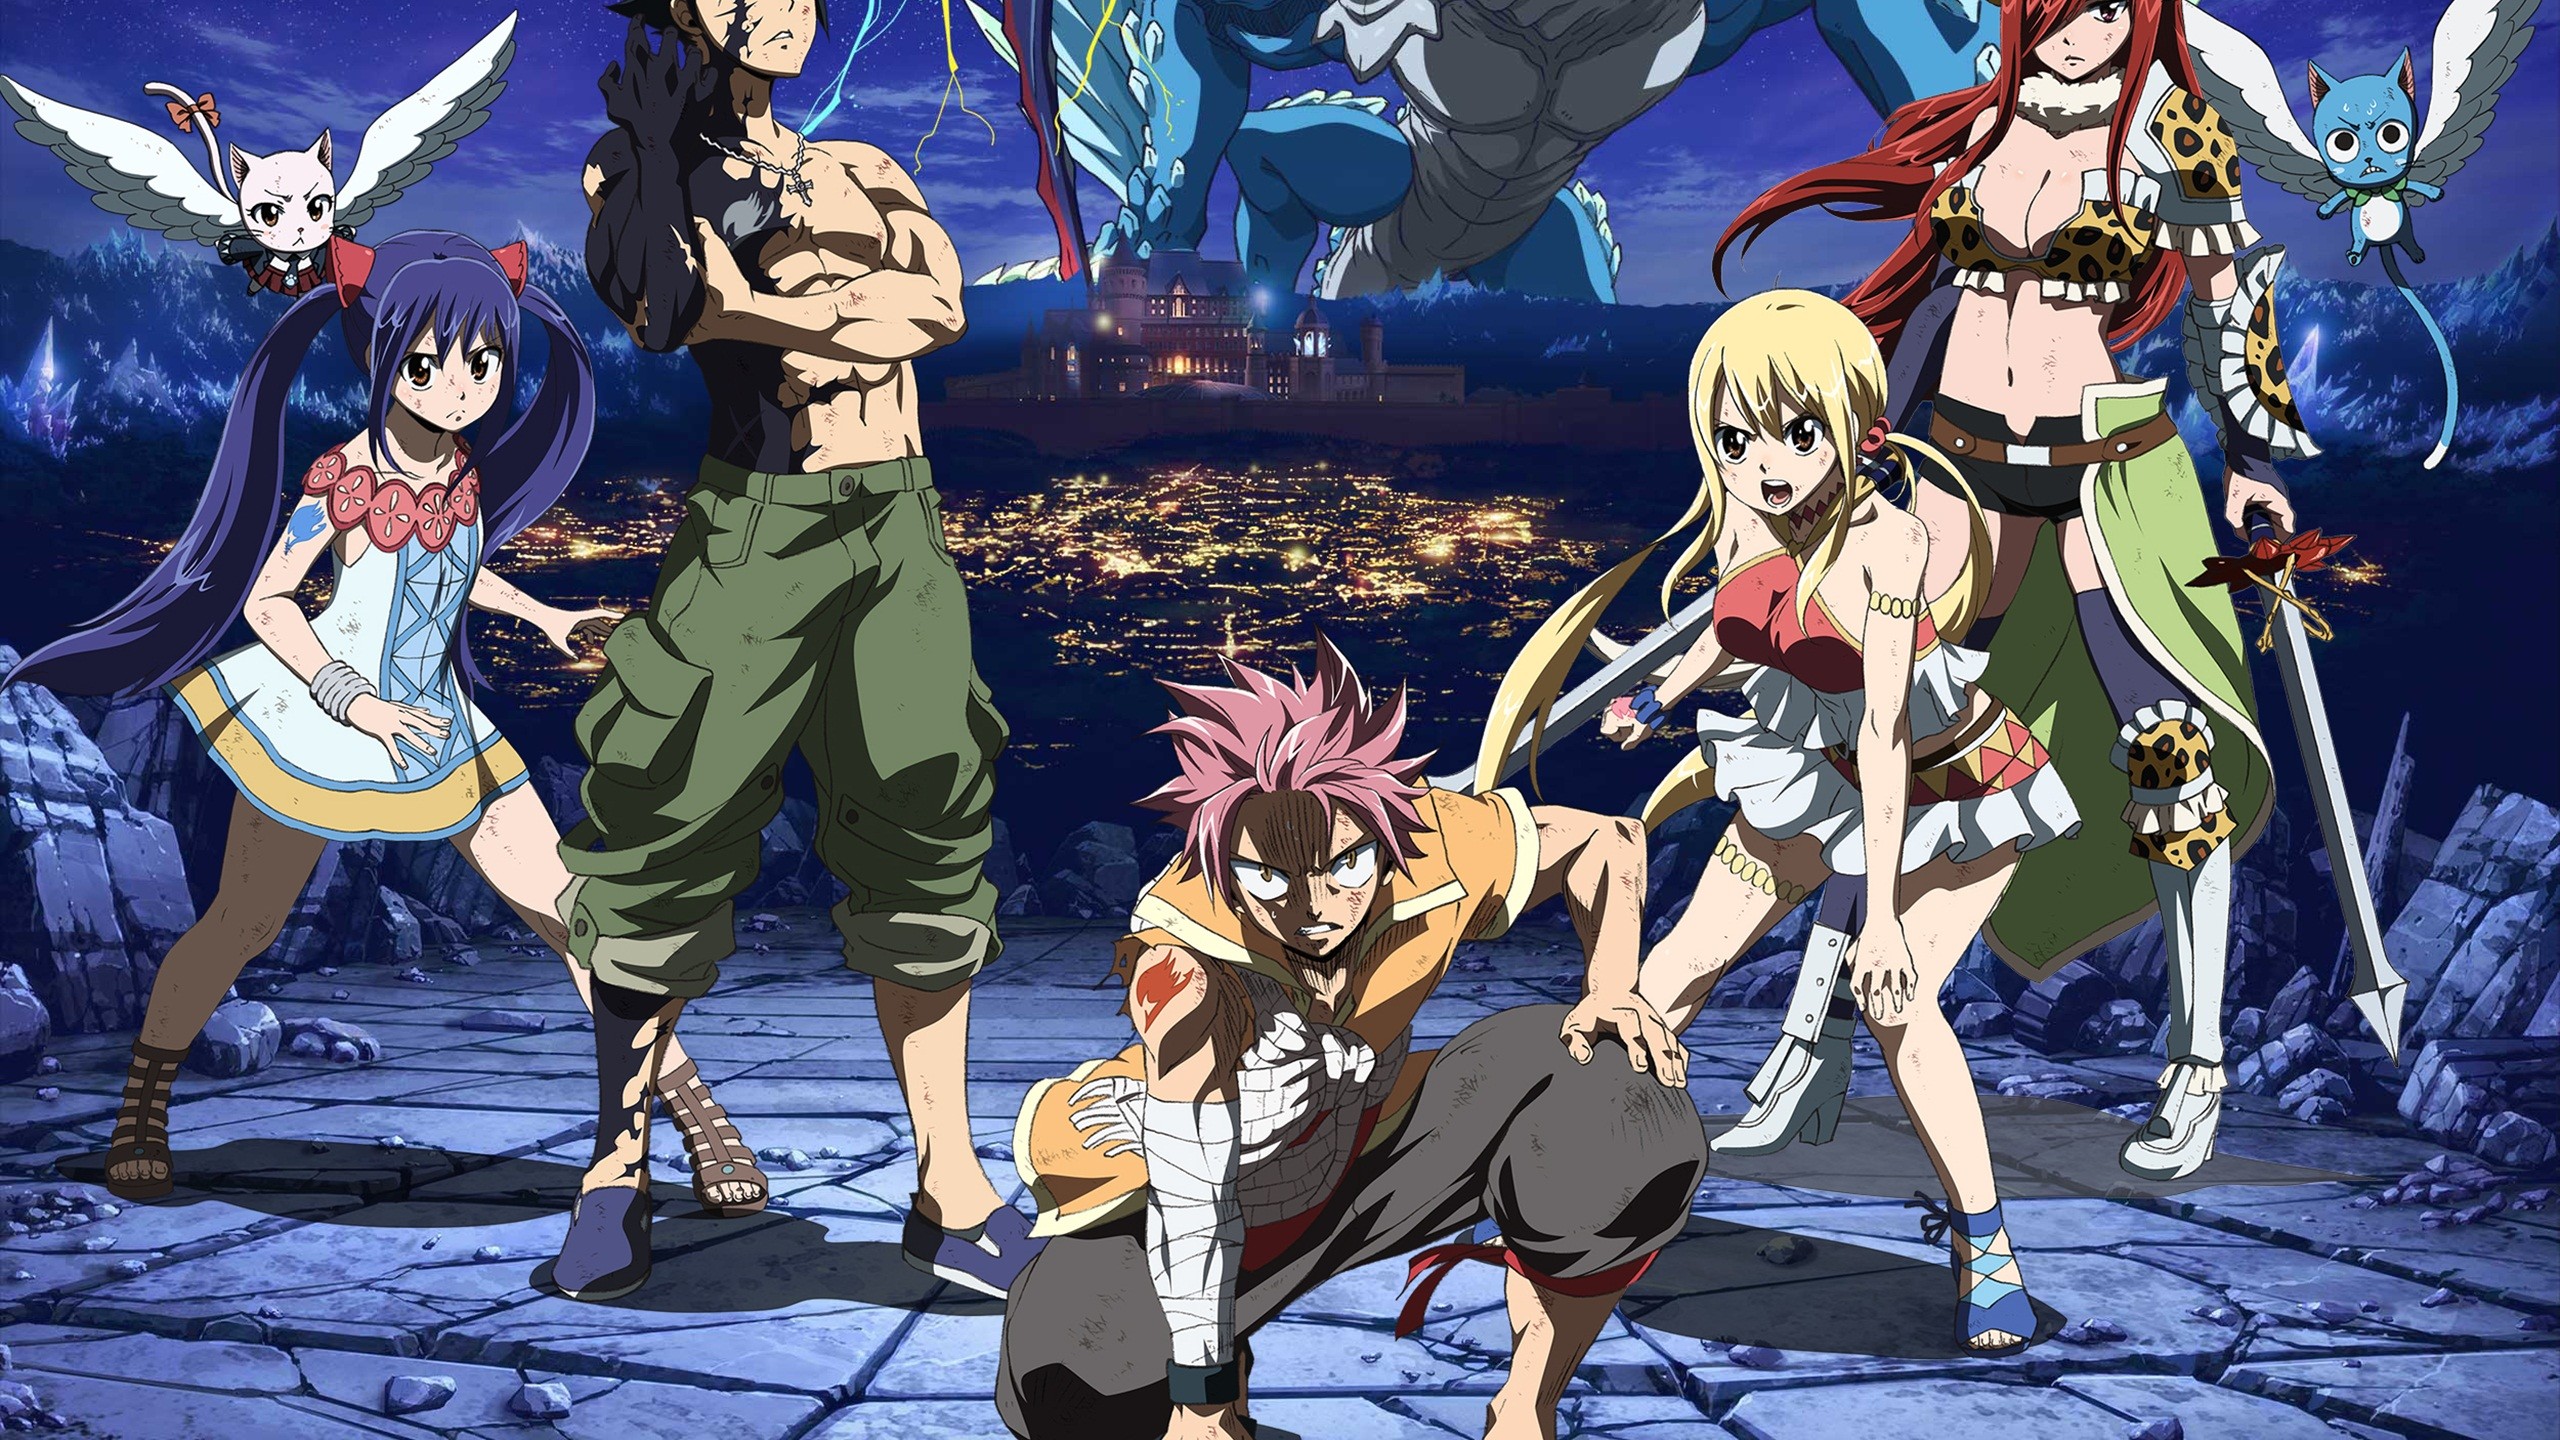 2560x1440 Fairy Tail Wallpapers Full HD 37368